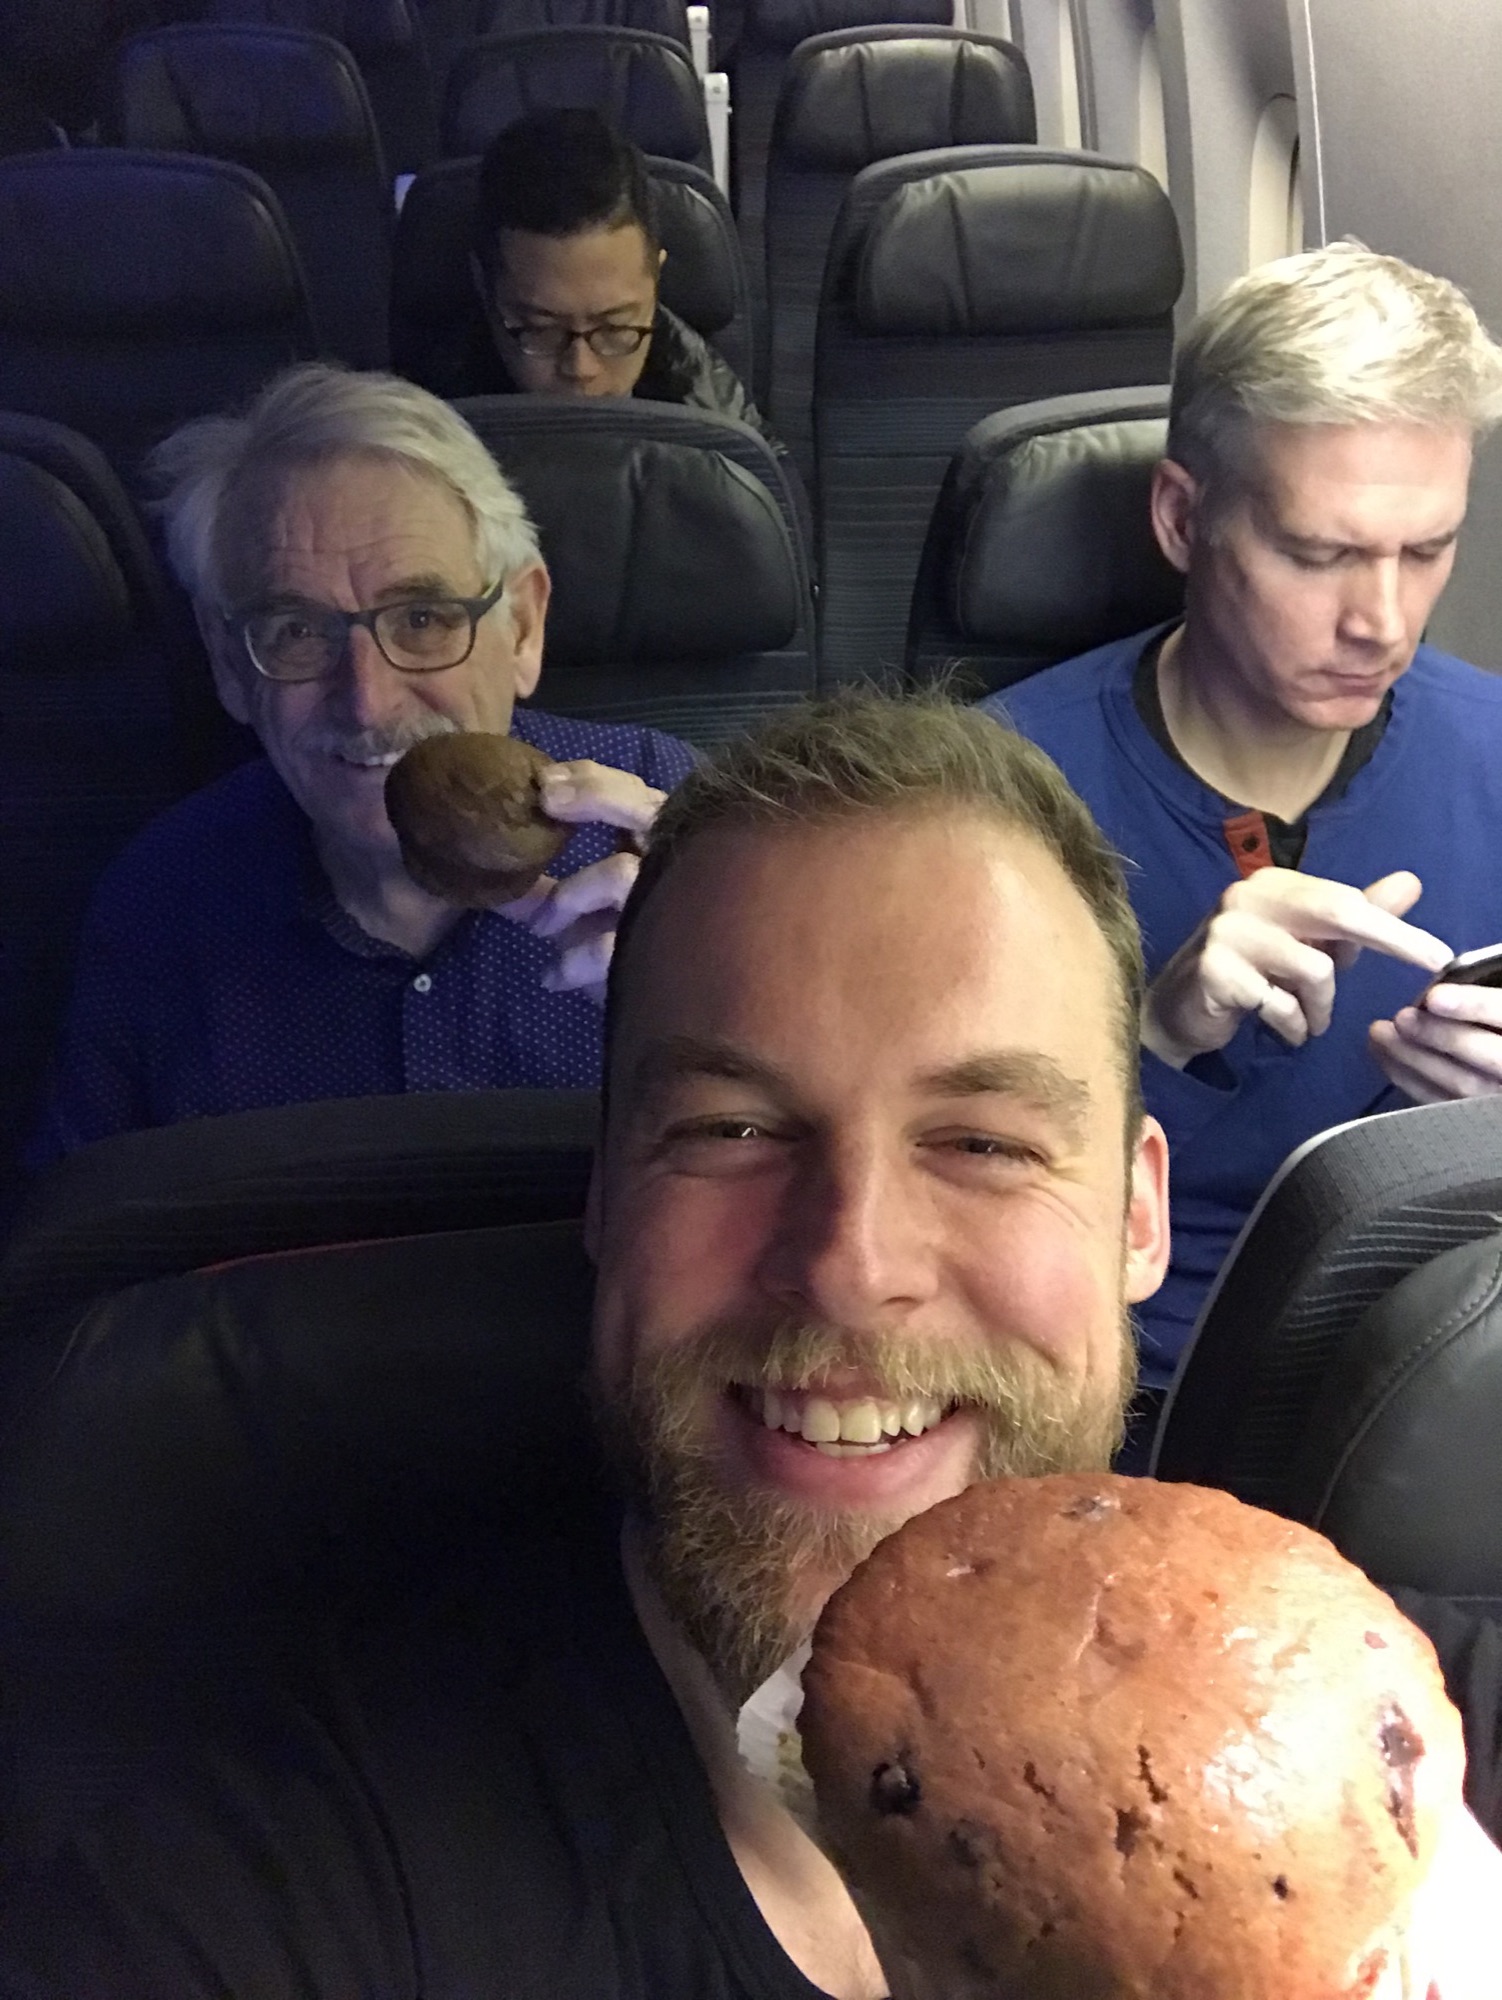 Alfred got us muffins for on the plane